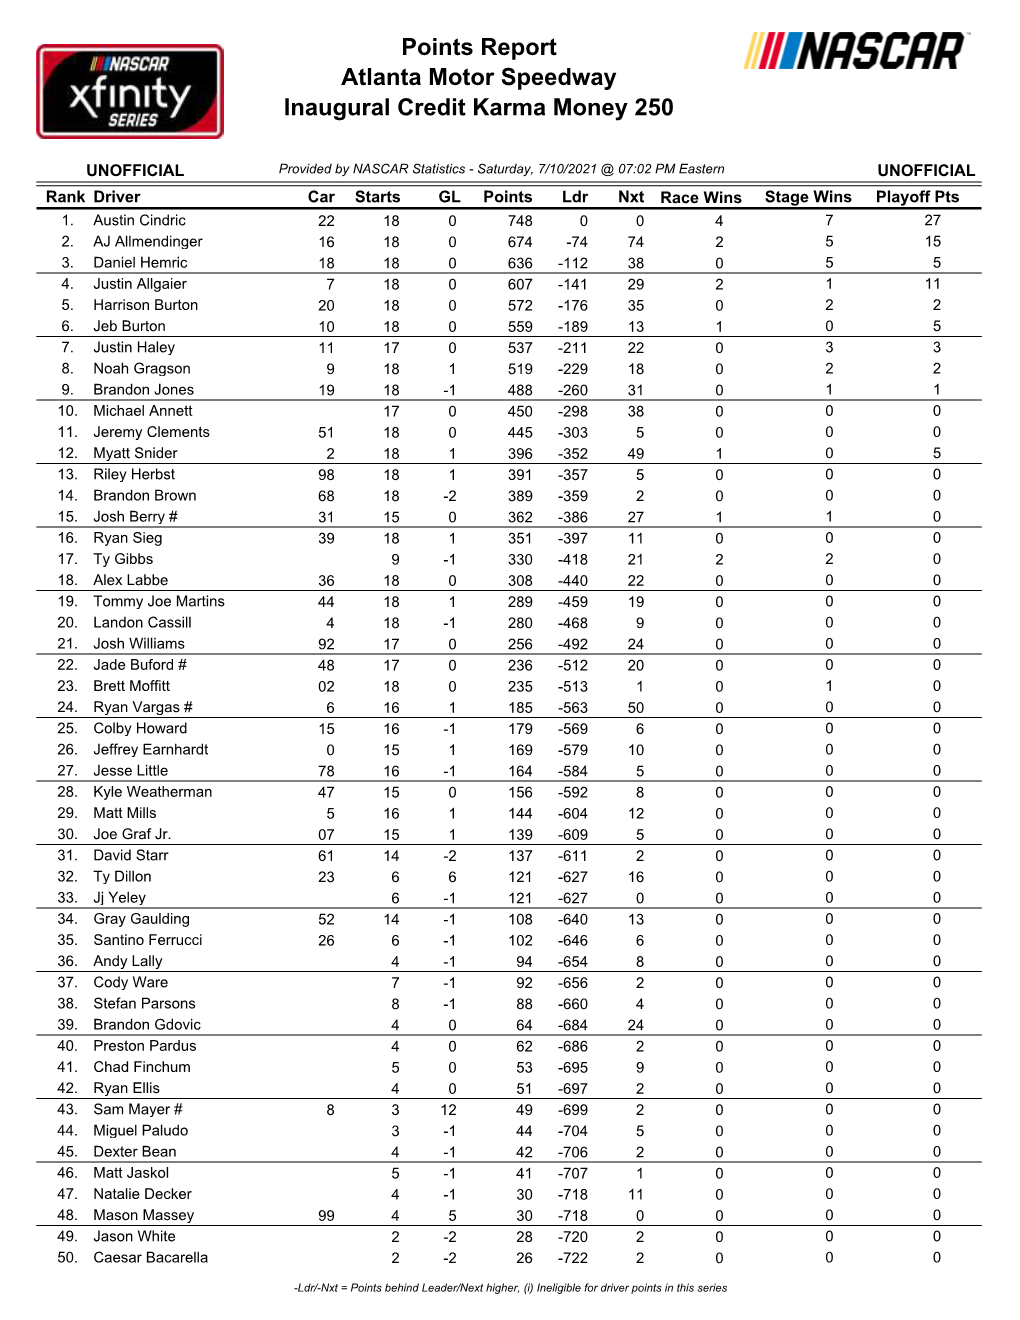 The Driver Points Standings